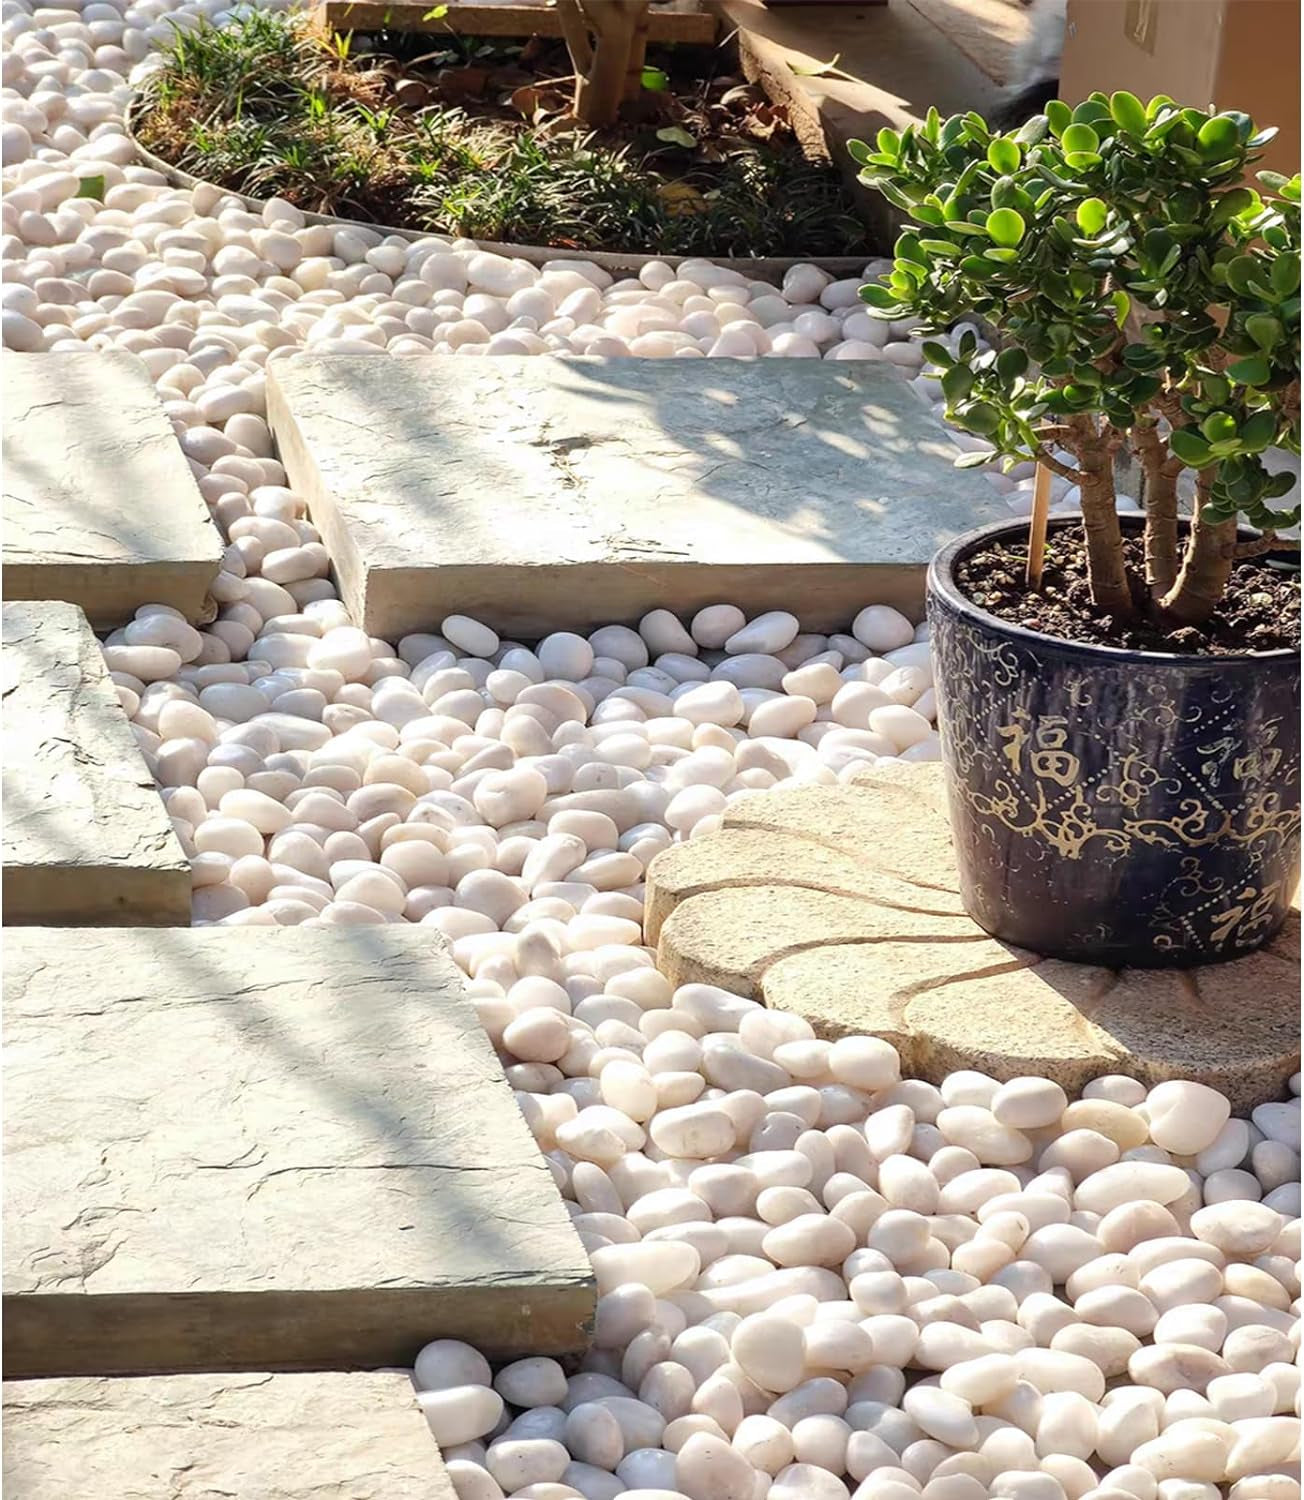 5Lbs White Pebbles for Indoor Plants, 0.8-1.2 Inch Smooth White River Rocks for Potted Plants, Decorative Polished Stones for Landscaping Vase Fish Tank and Outdoor Garden Pavers